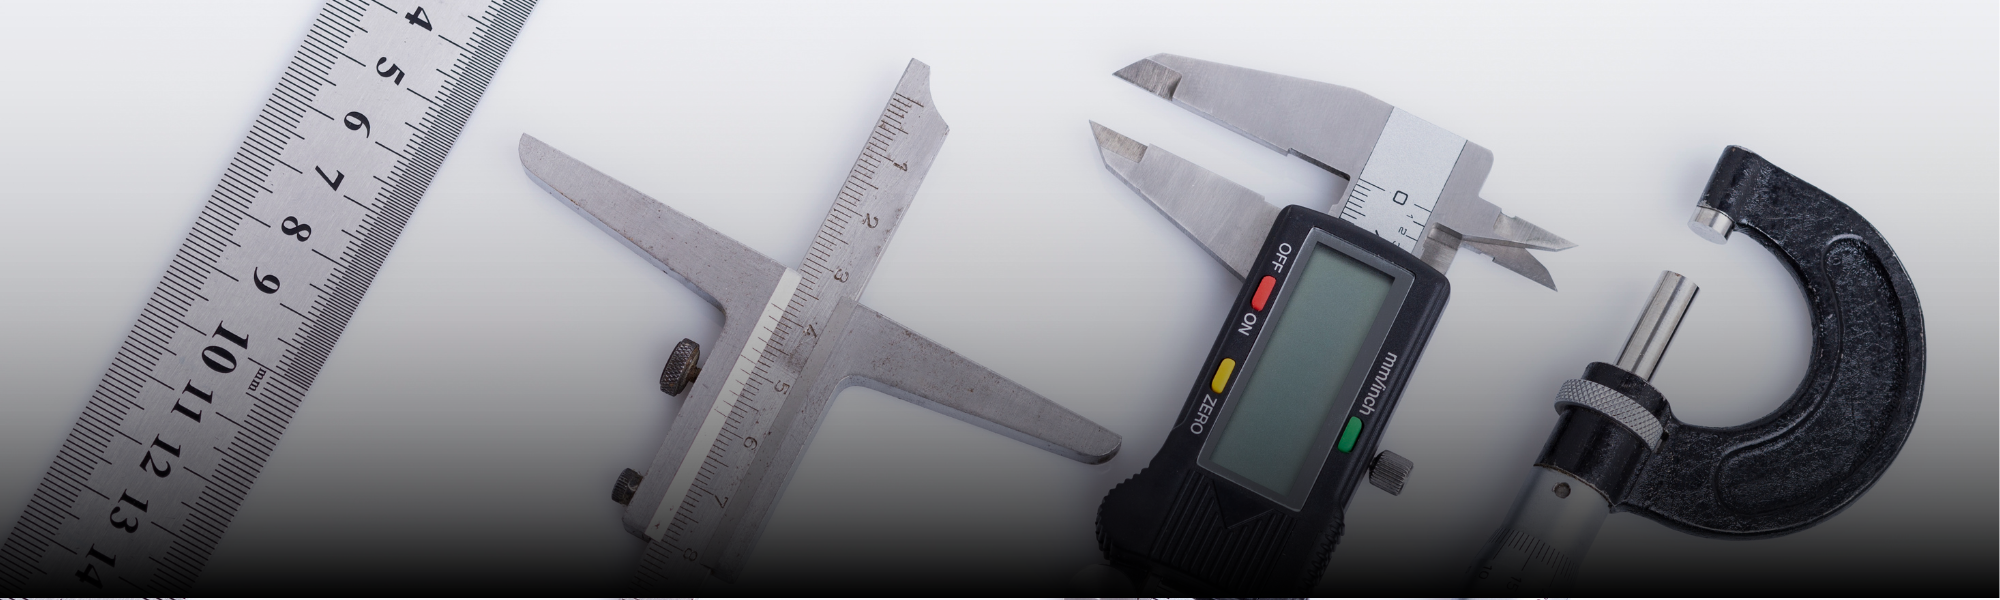 Inaccurate Results and Three Other Signs Your Equipment Needs Calibration